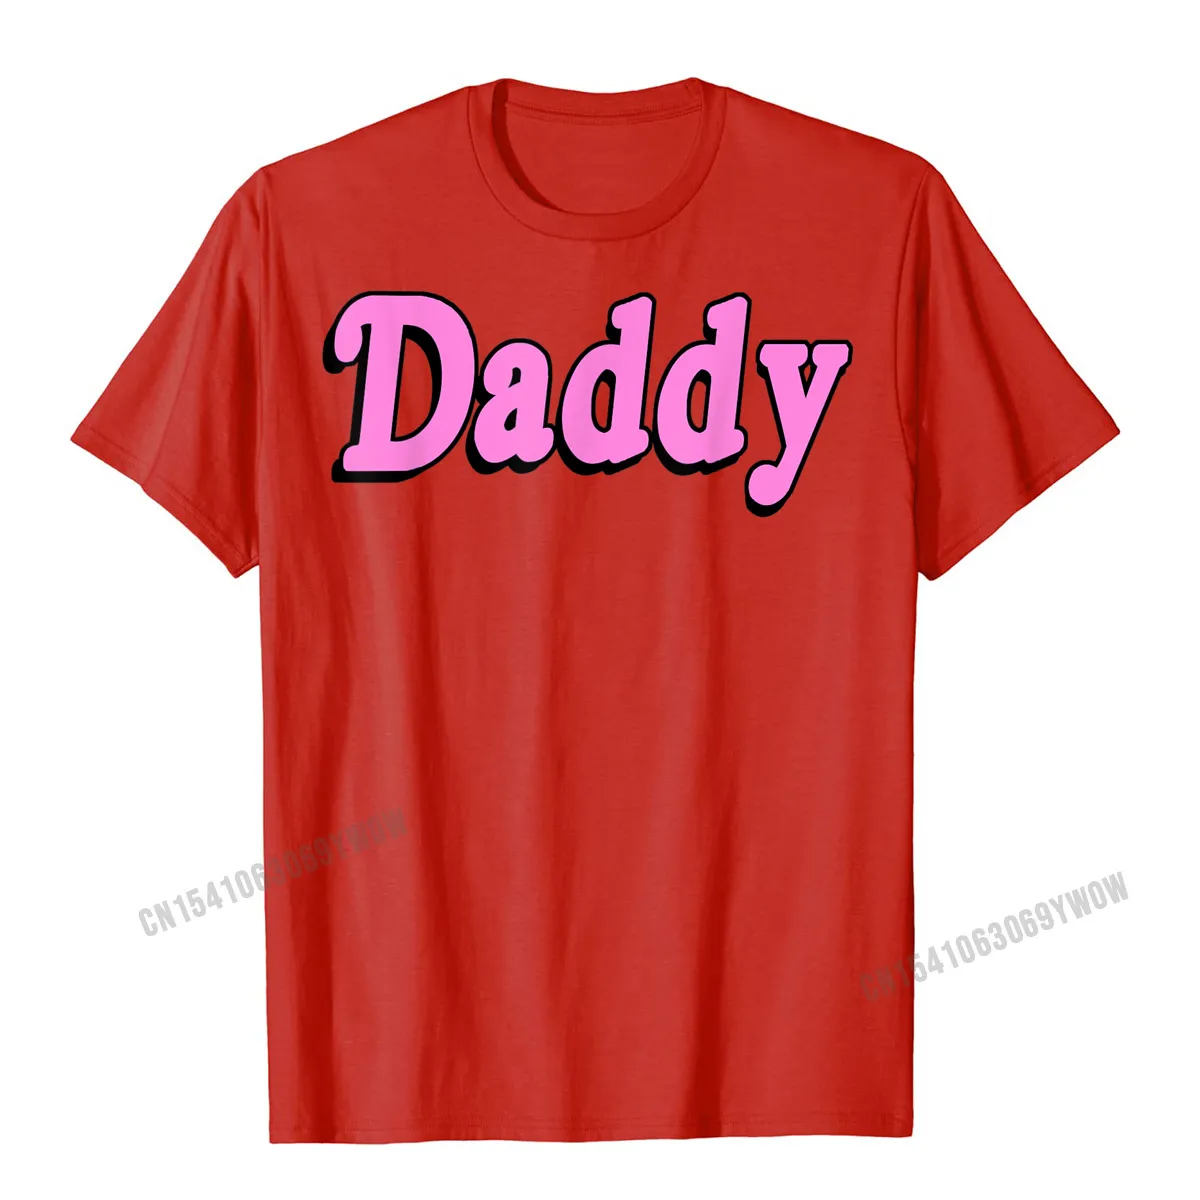 Male Funky Slim Fit Tops & Tees Round Collar Summer/Autumn 100% Cotton Fabric Tshirts Custom Short Sleeve Design Tops & Tees Daddy T-Shirt. Pink Aesthetic Fashion Shirt__1084 red